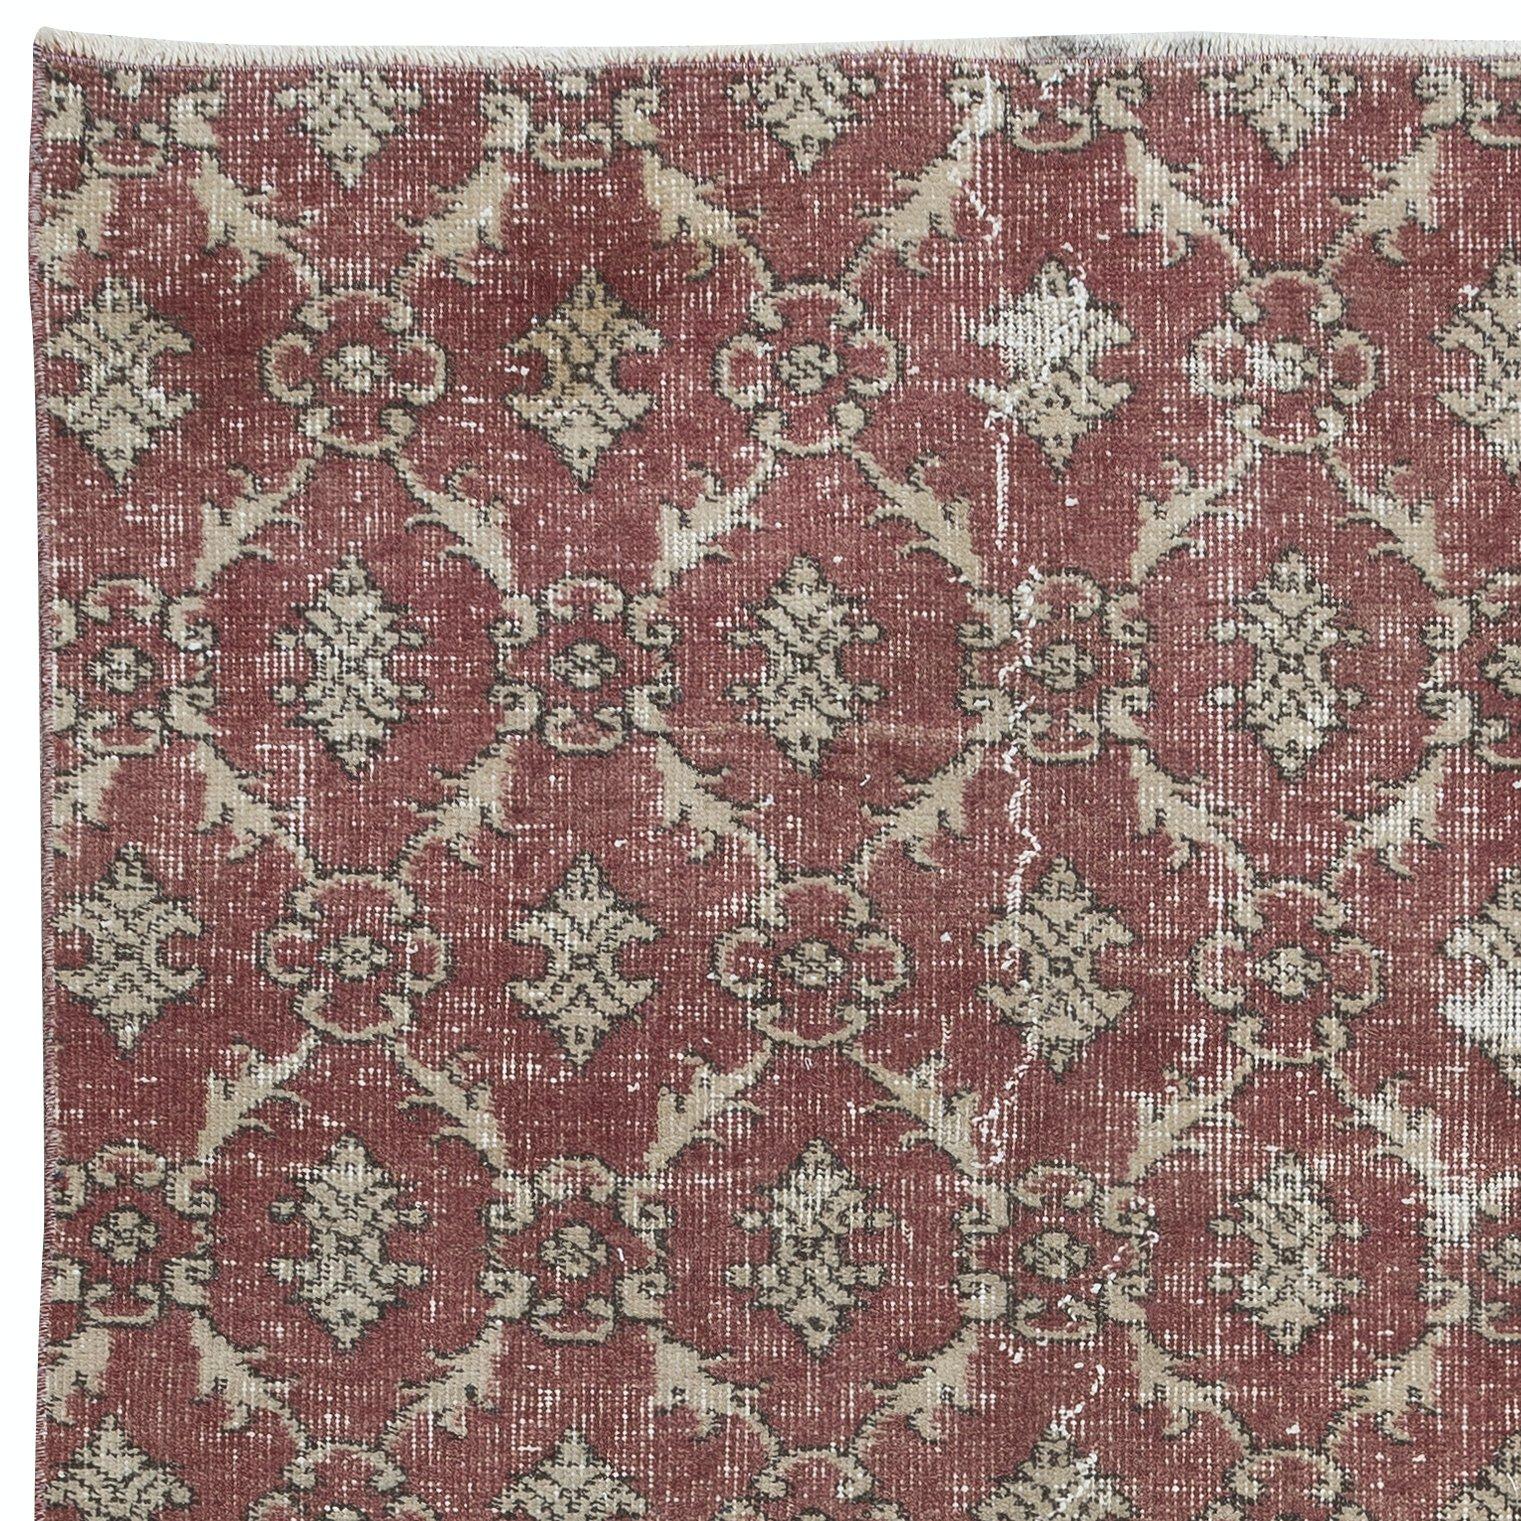 Hand-Knotted 3.3x6.6 Ft Small Handmade Turkish Rug in Barn Red & Beige, Rustic Kitchen Rug For Sale